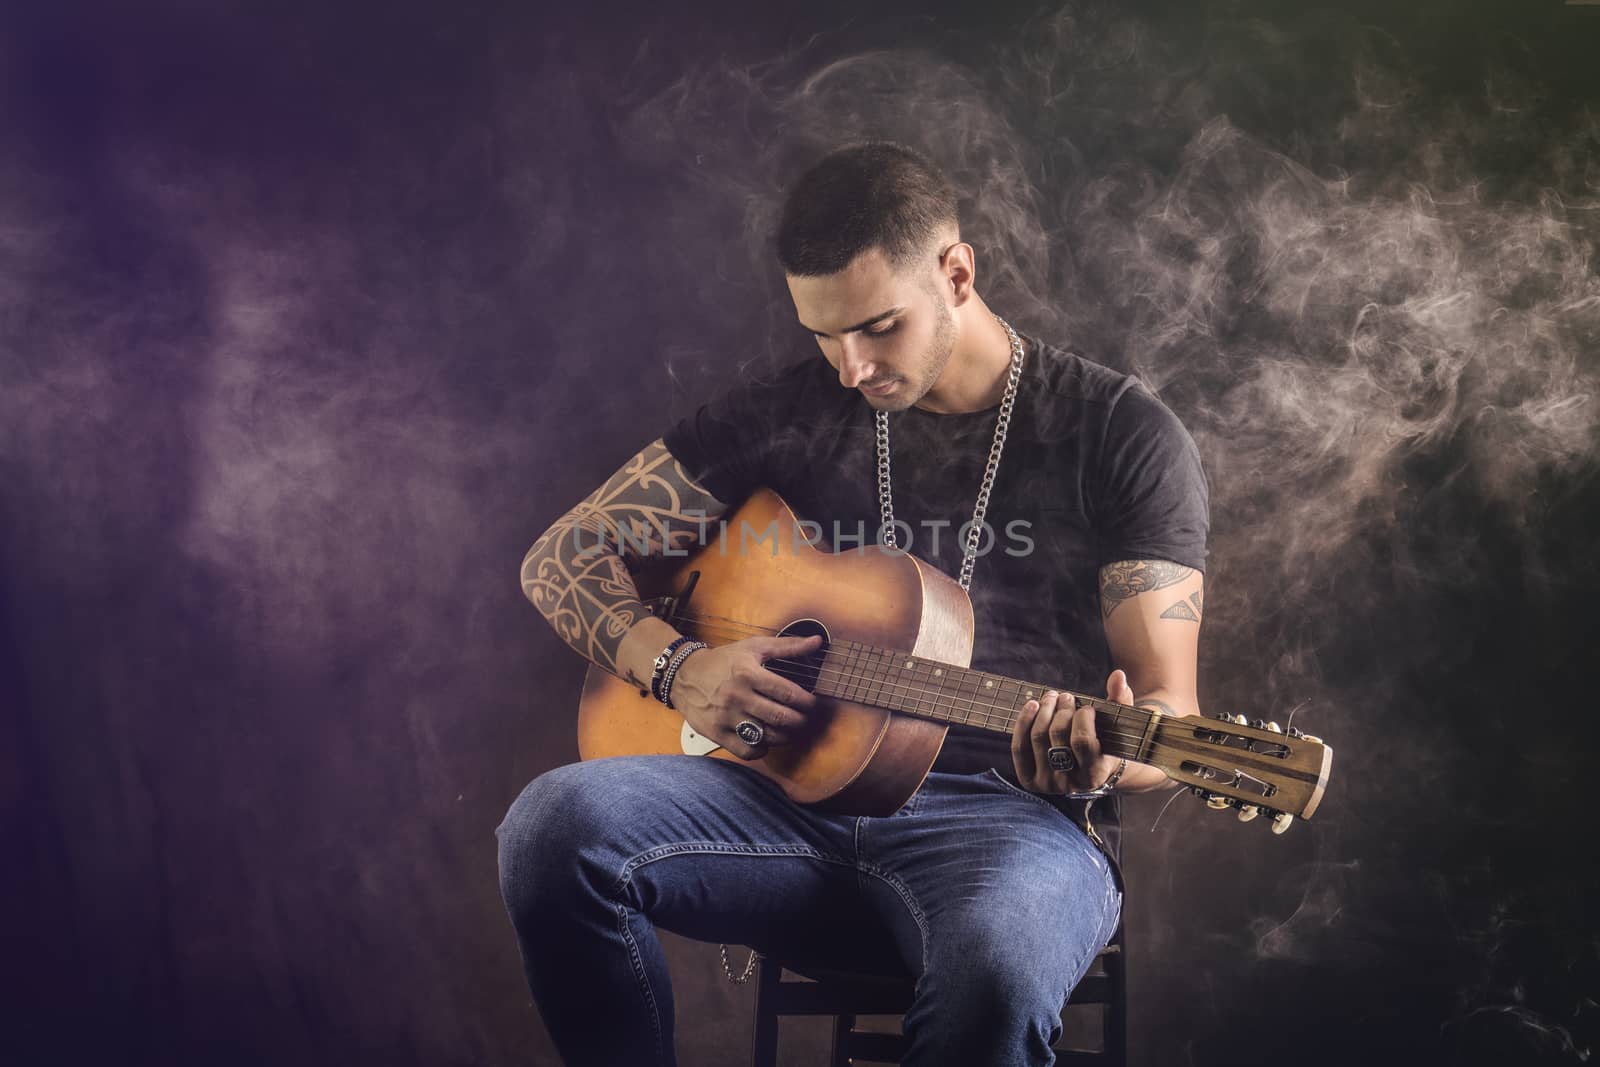 Bearded and tattooed man with hairstyle playing guitar by artofphoto